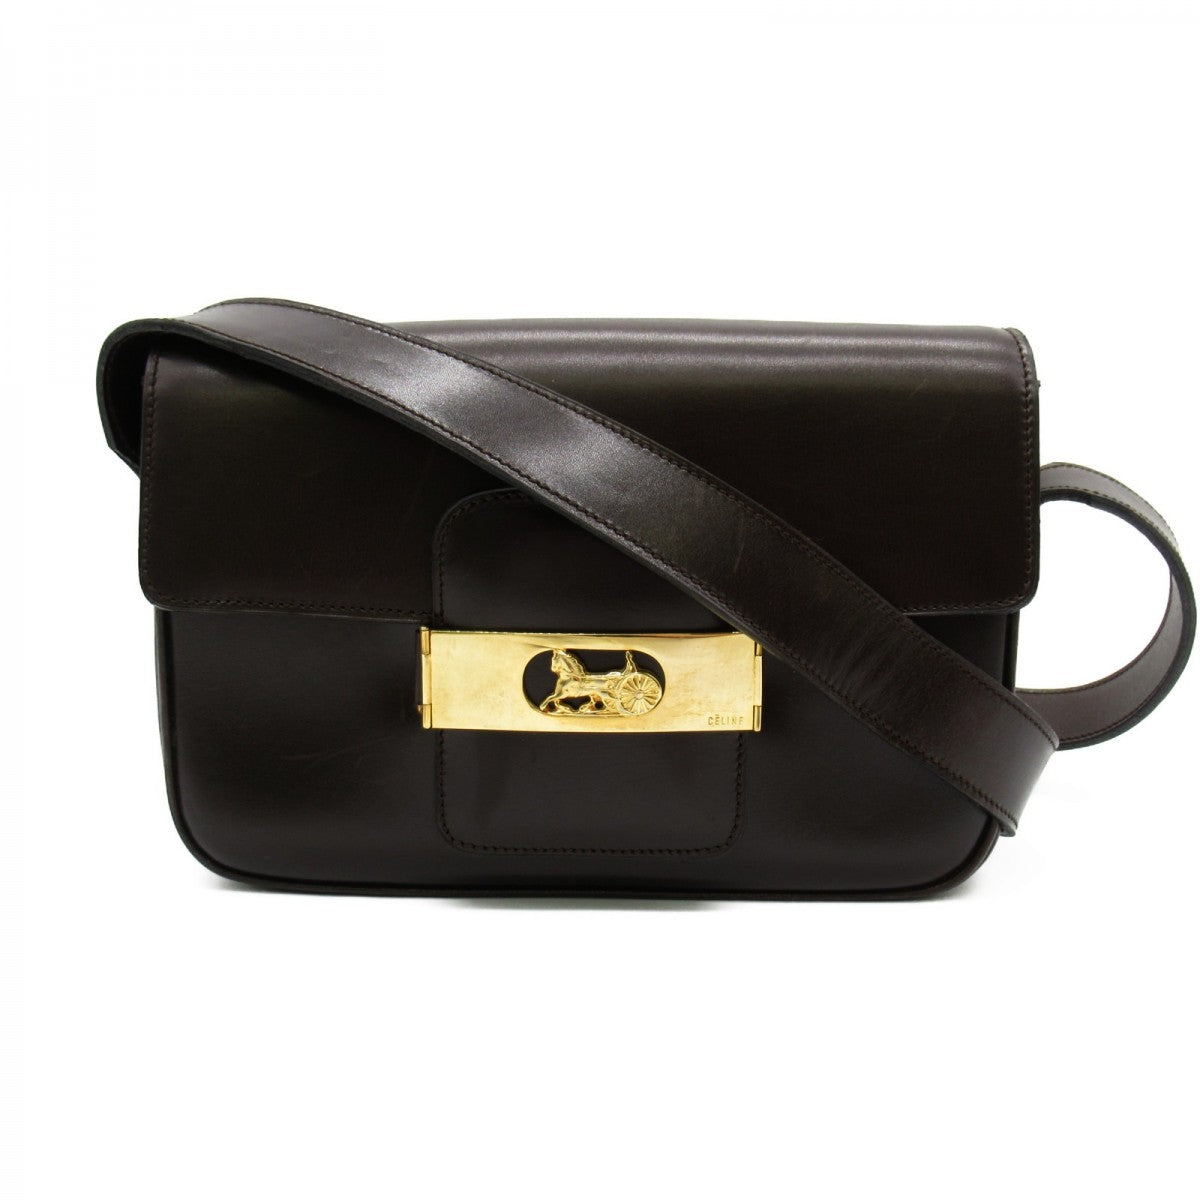 Carriage Leather Crossbody Bag